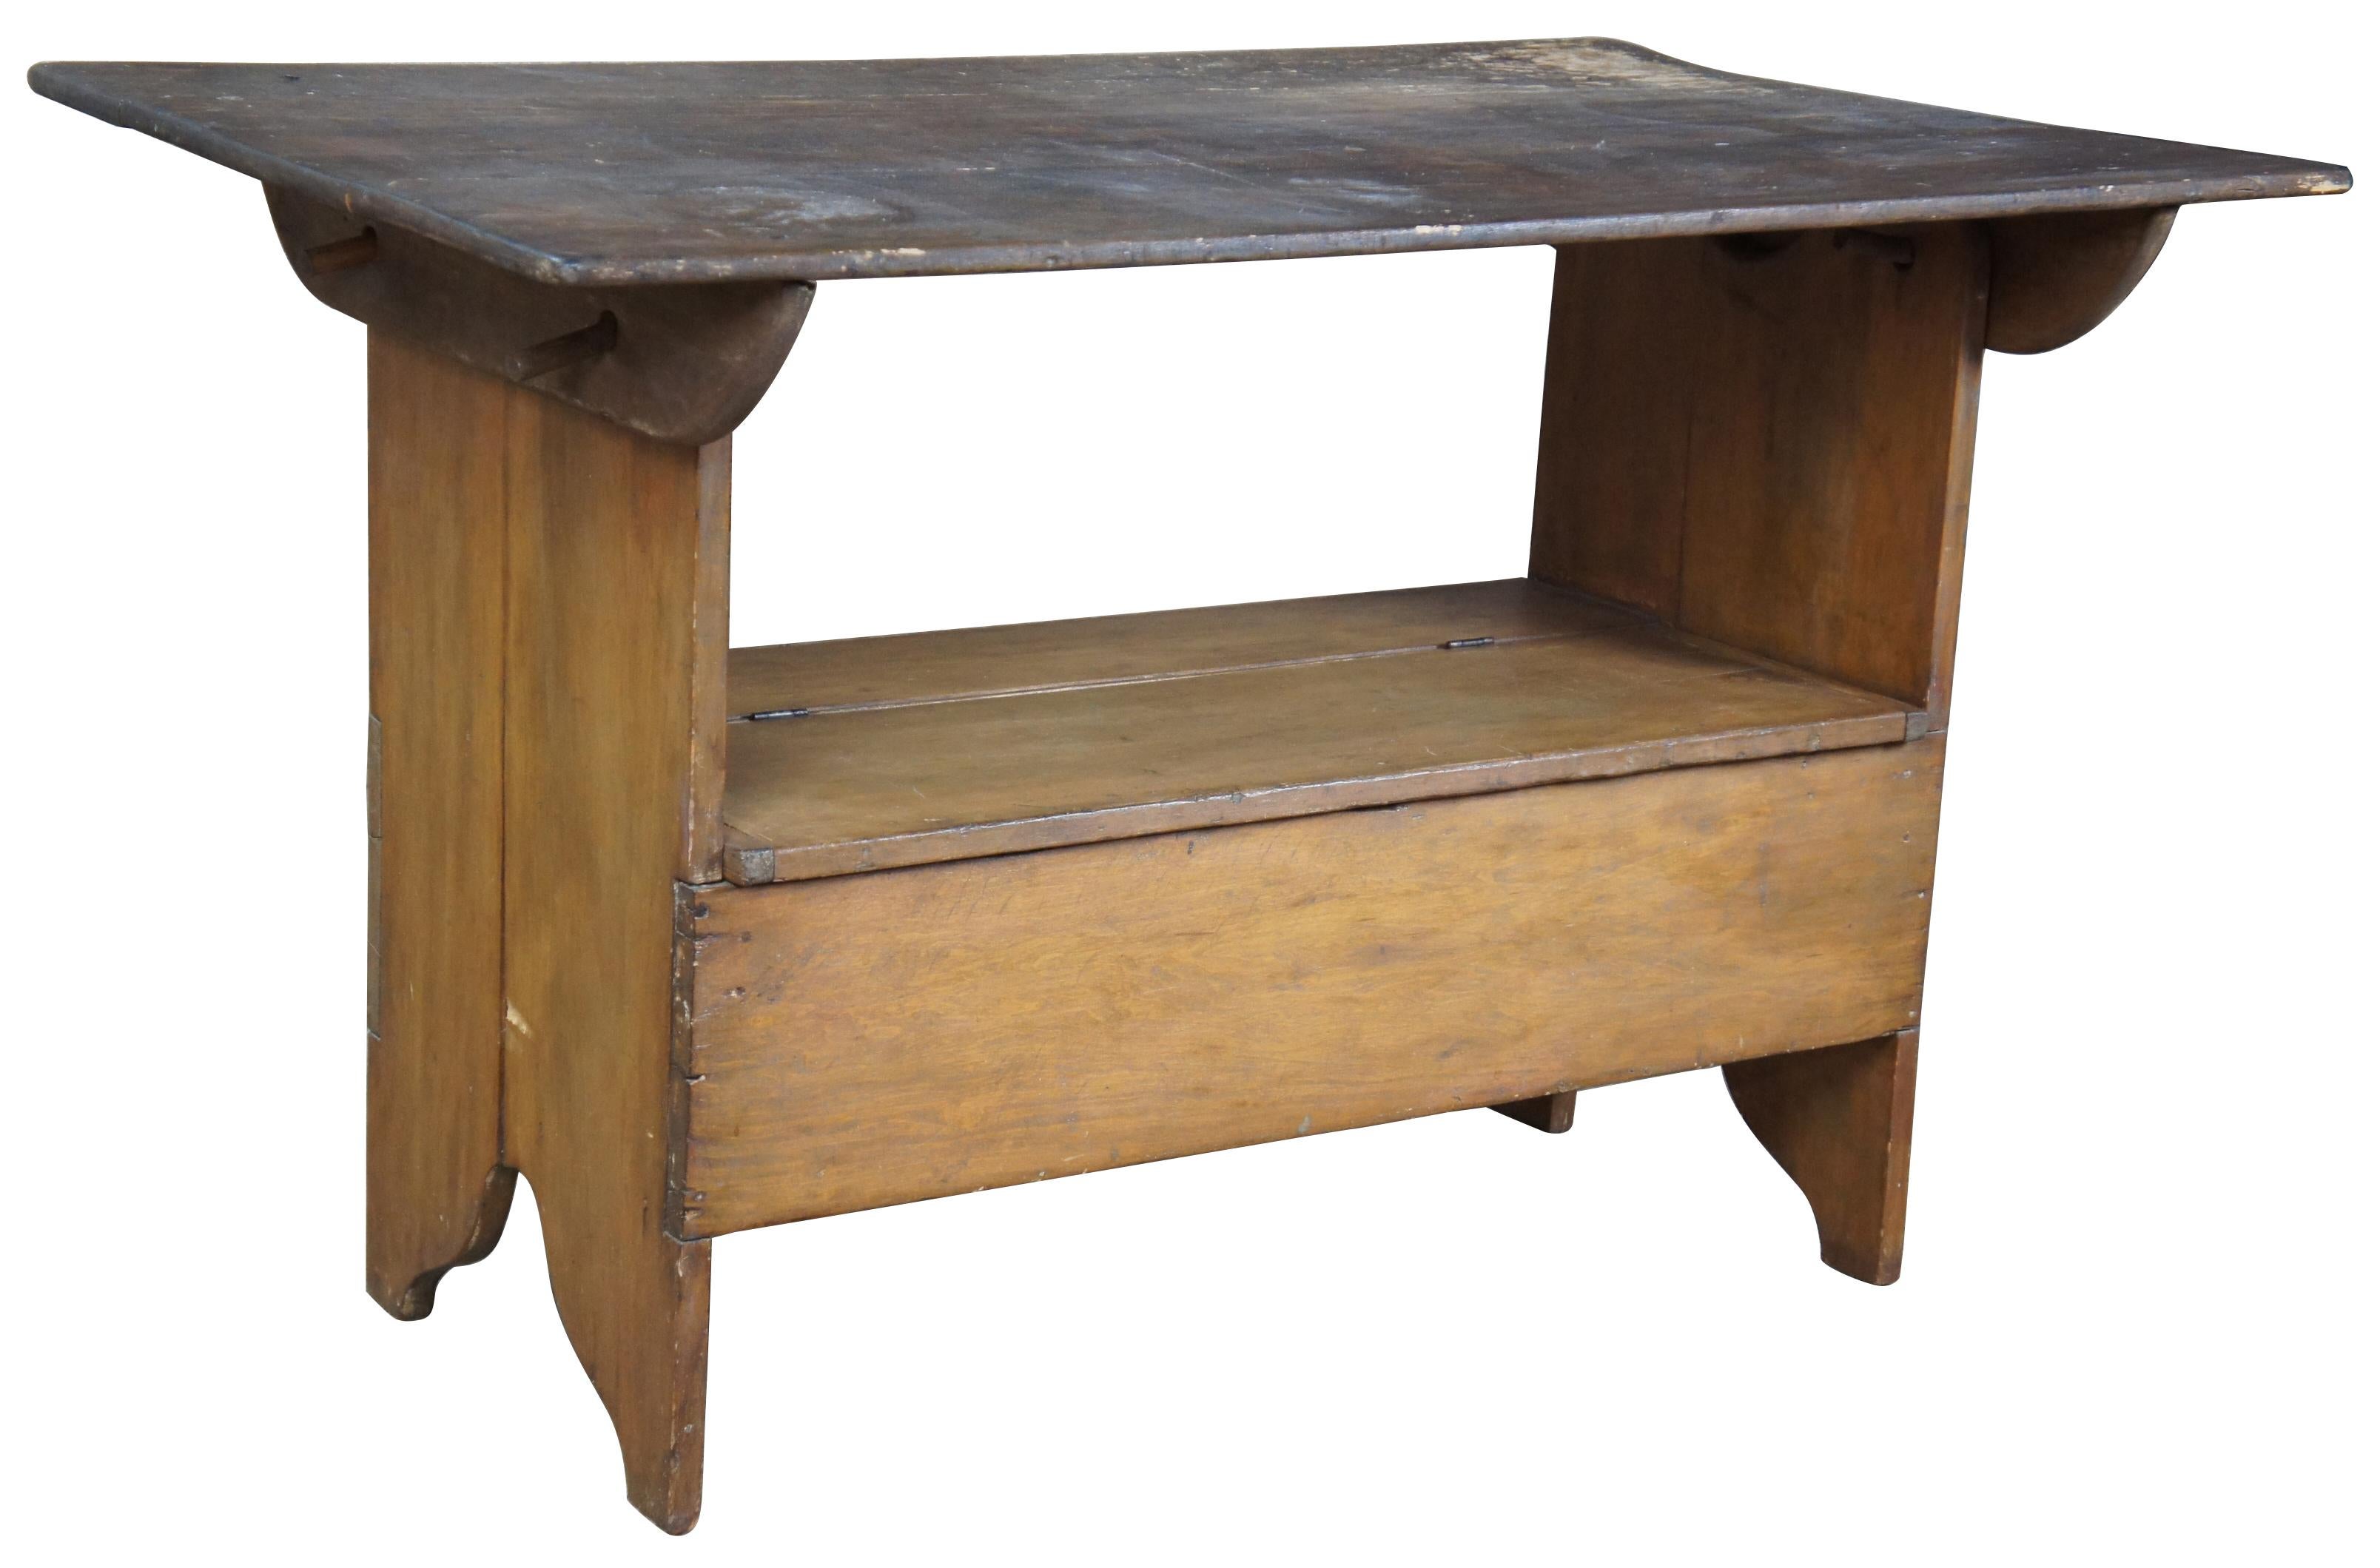 Late 19th century pine farmhouse convertable table slash bench. Features a lidded seat allowing for additional storage. Top is supported by four wooded dowels that slide easily into place.

Measures: Base 36